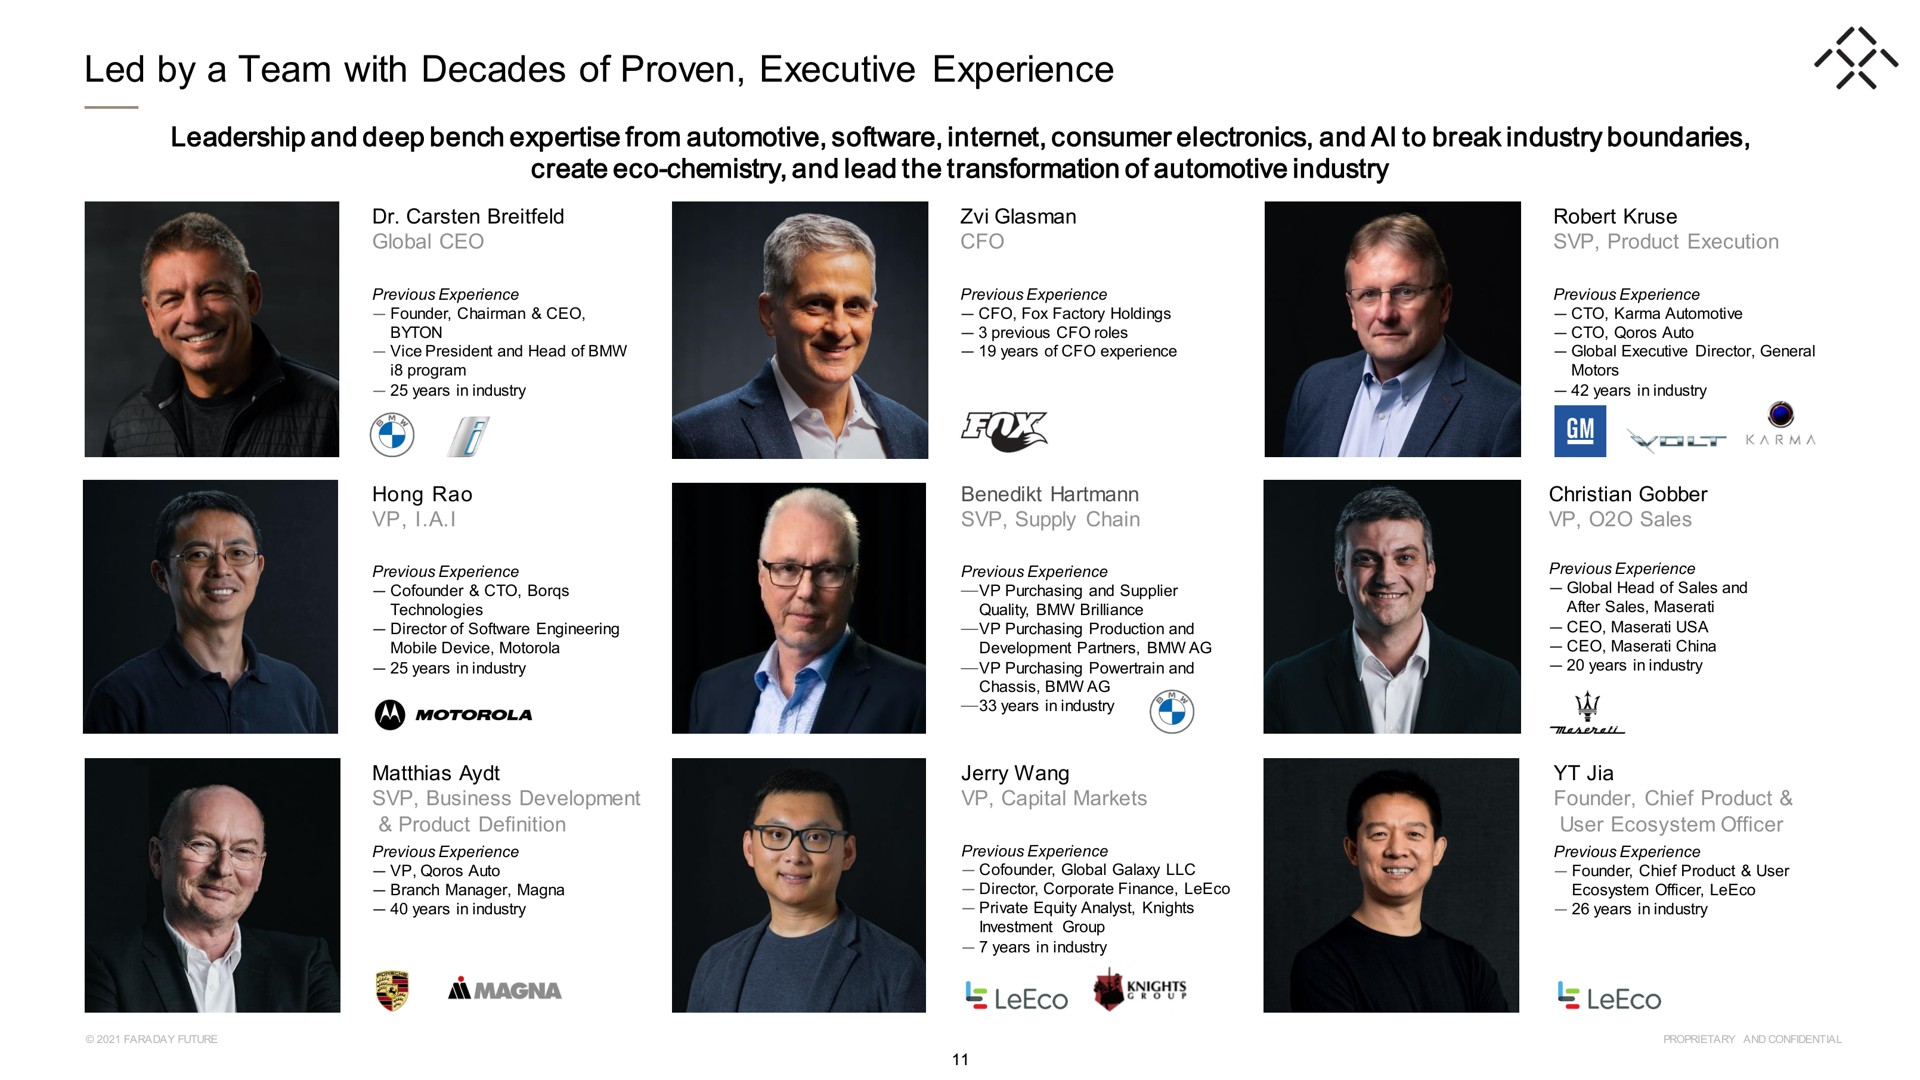 led by a team with decades of proven executive experience | Faraday Future